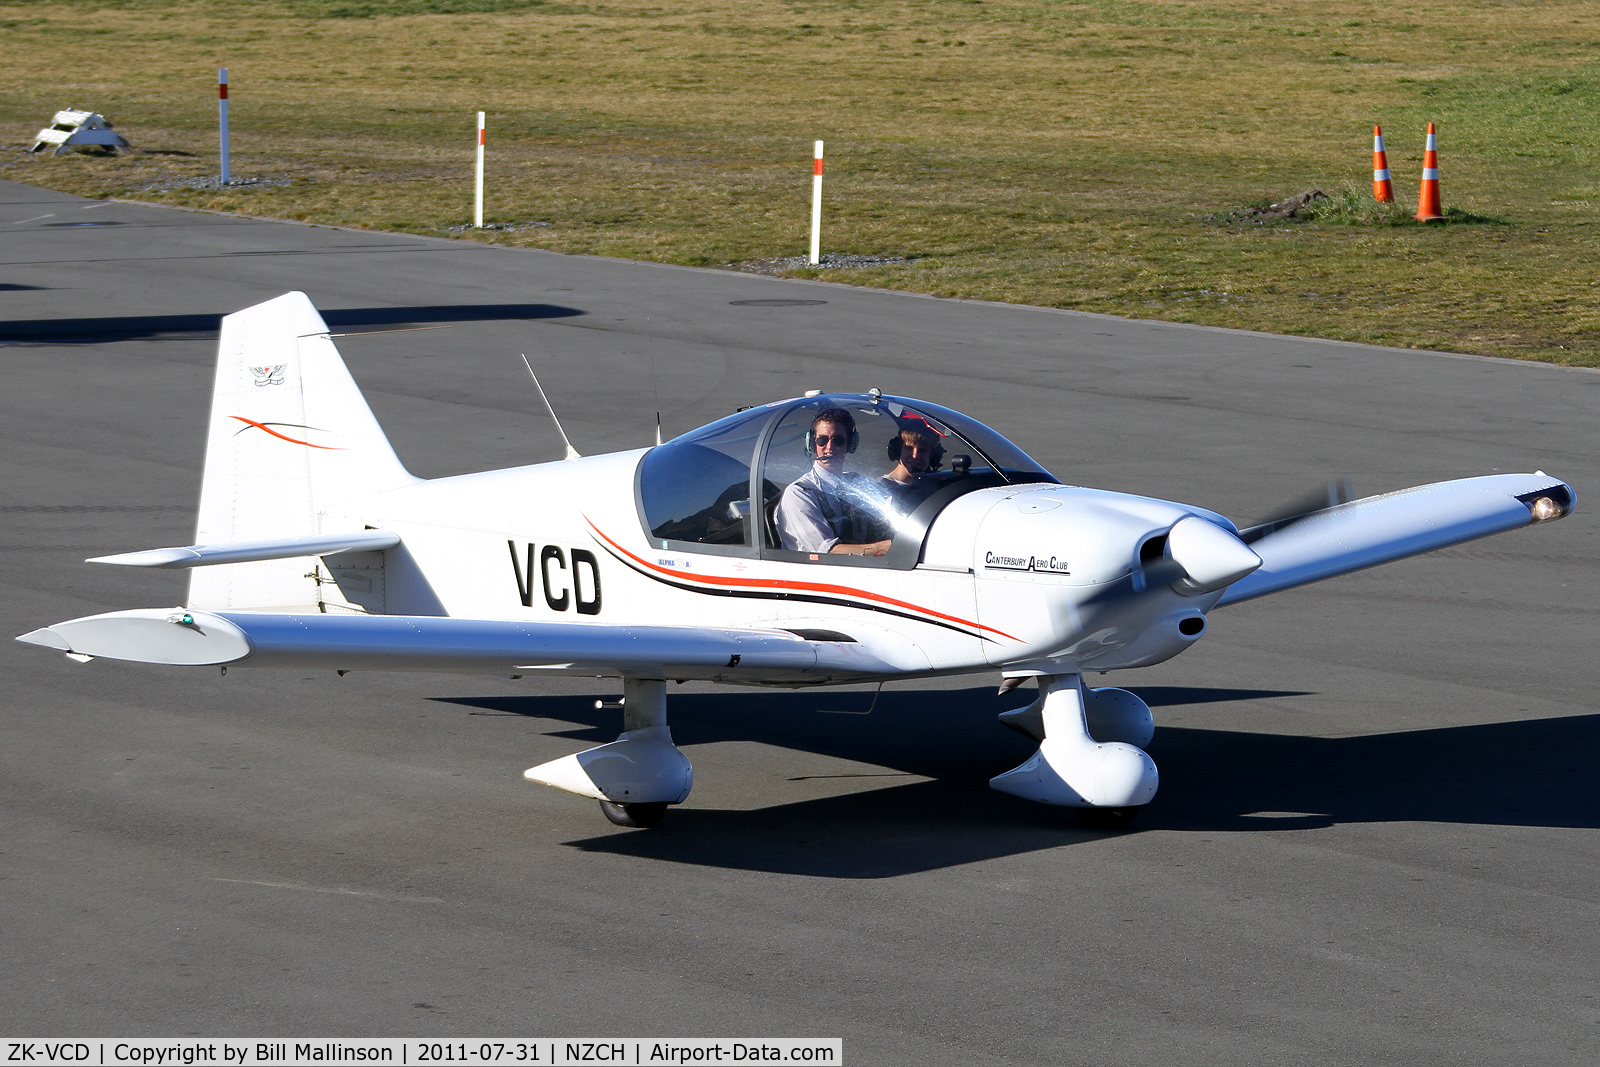 ZK-VCD, Alpha Alp C/N 160A-07006, taxi after return from training flight